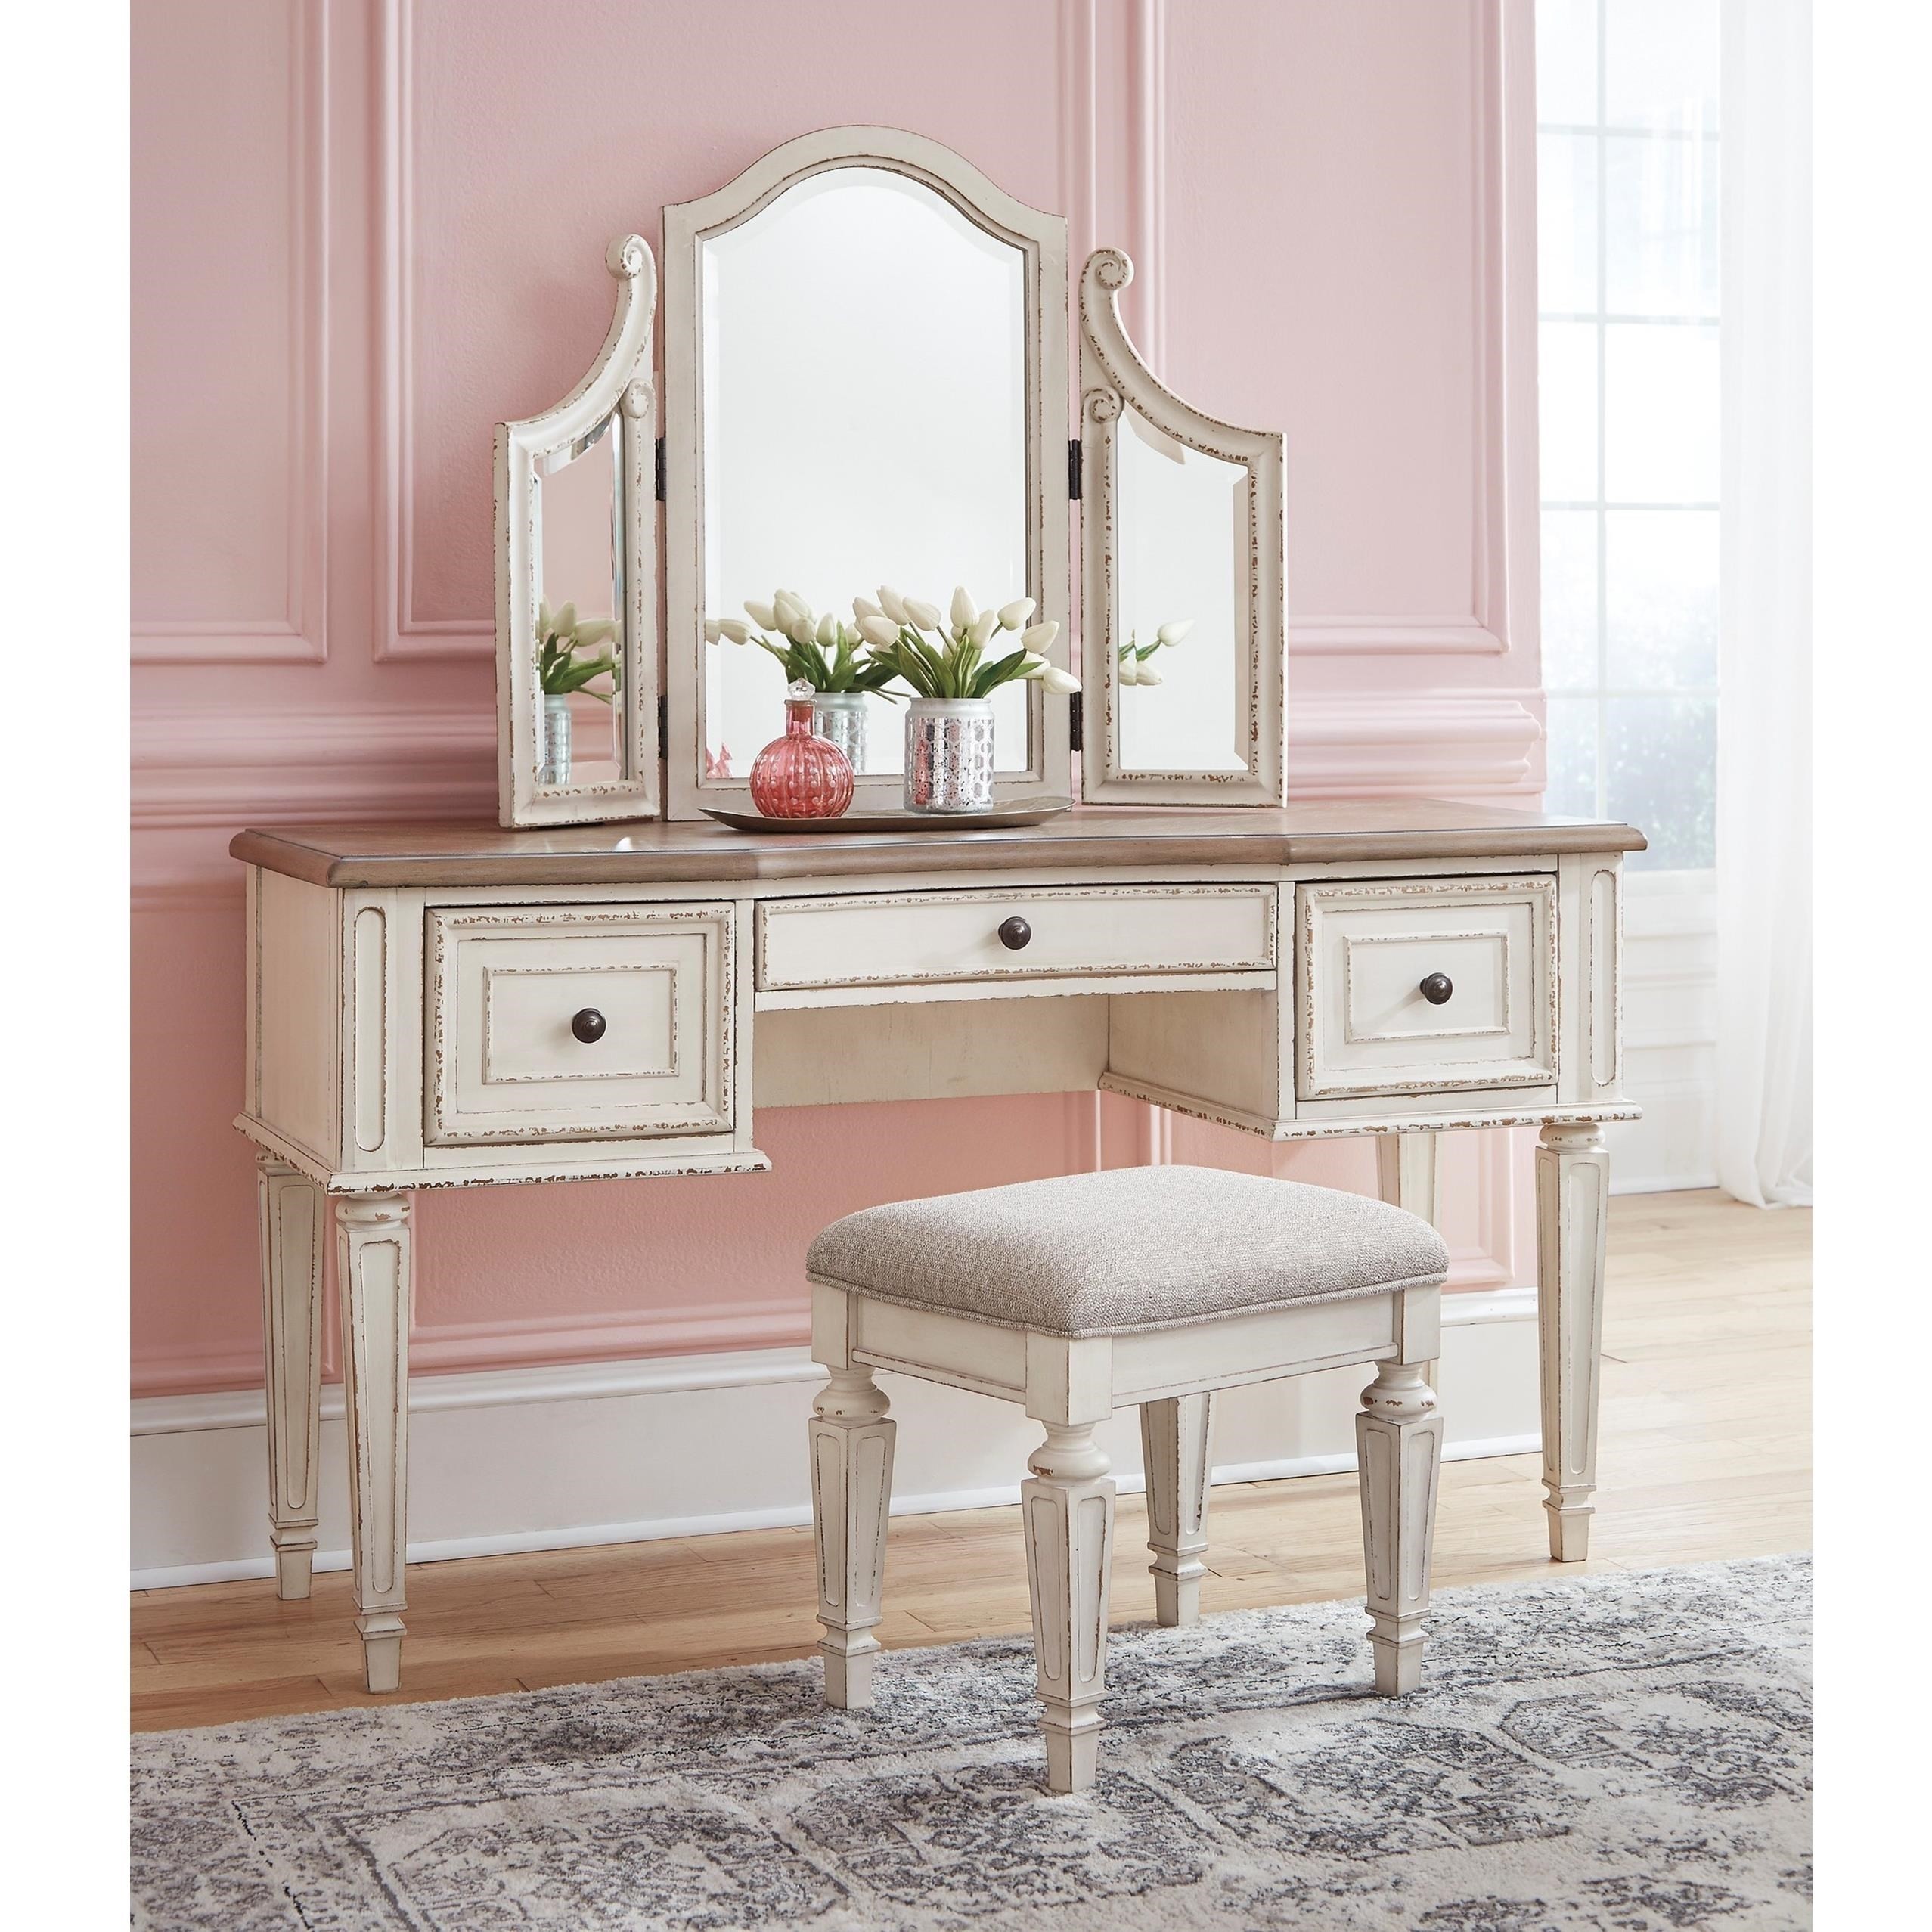 Bathroom entrancing vanity tables with impressive hooked 1